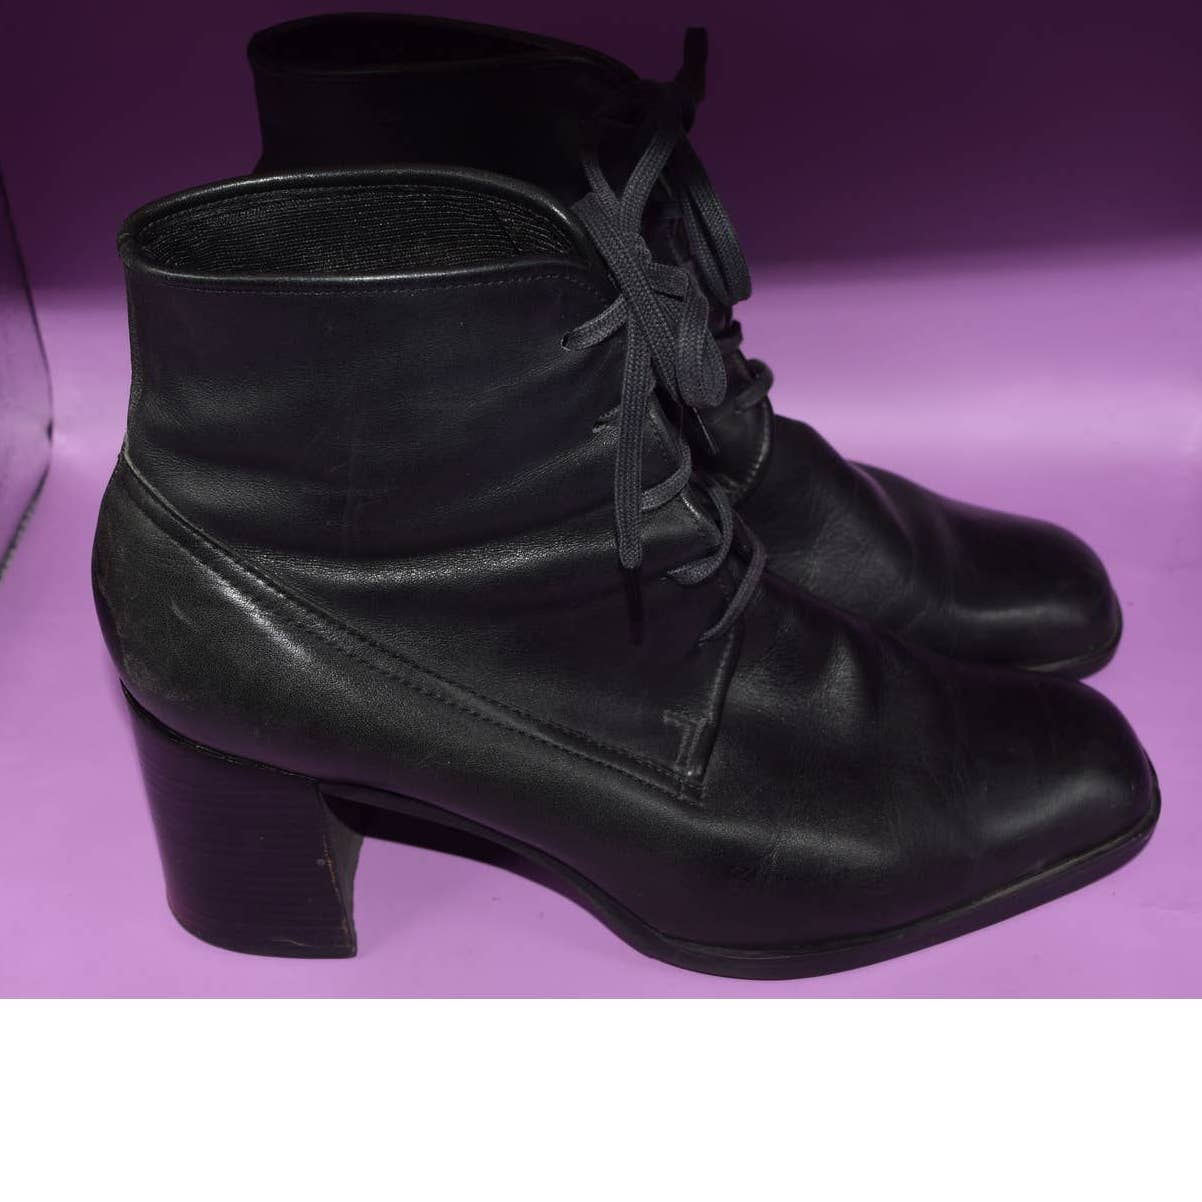 Enzo Angiolini Black Lace Up Ankle Boots - 8.5 M